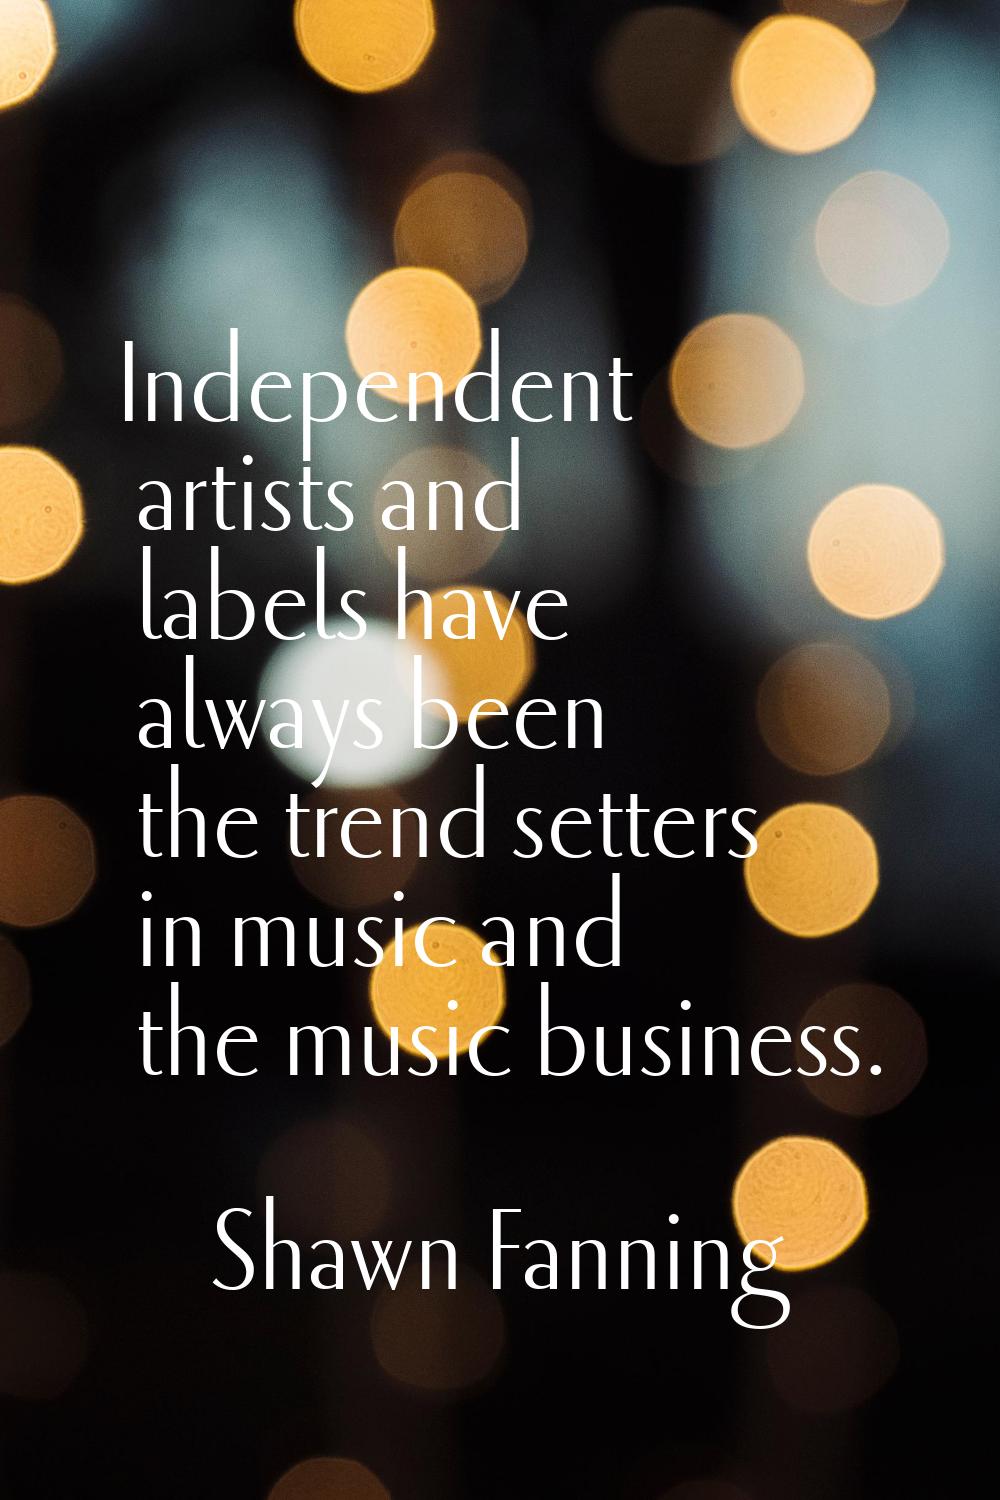 Independent artists and labels have always been the trend setters in music and the music business.